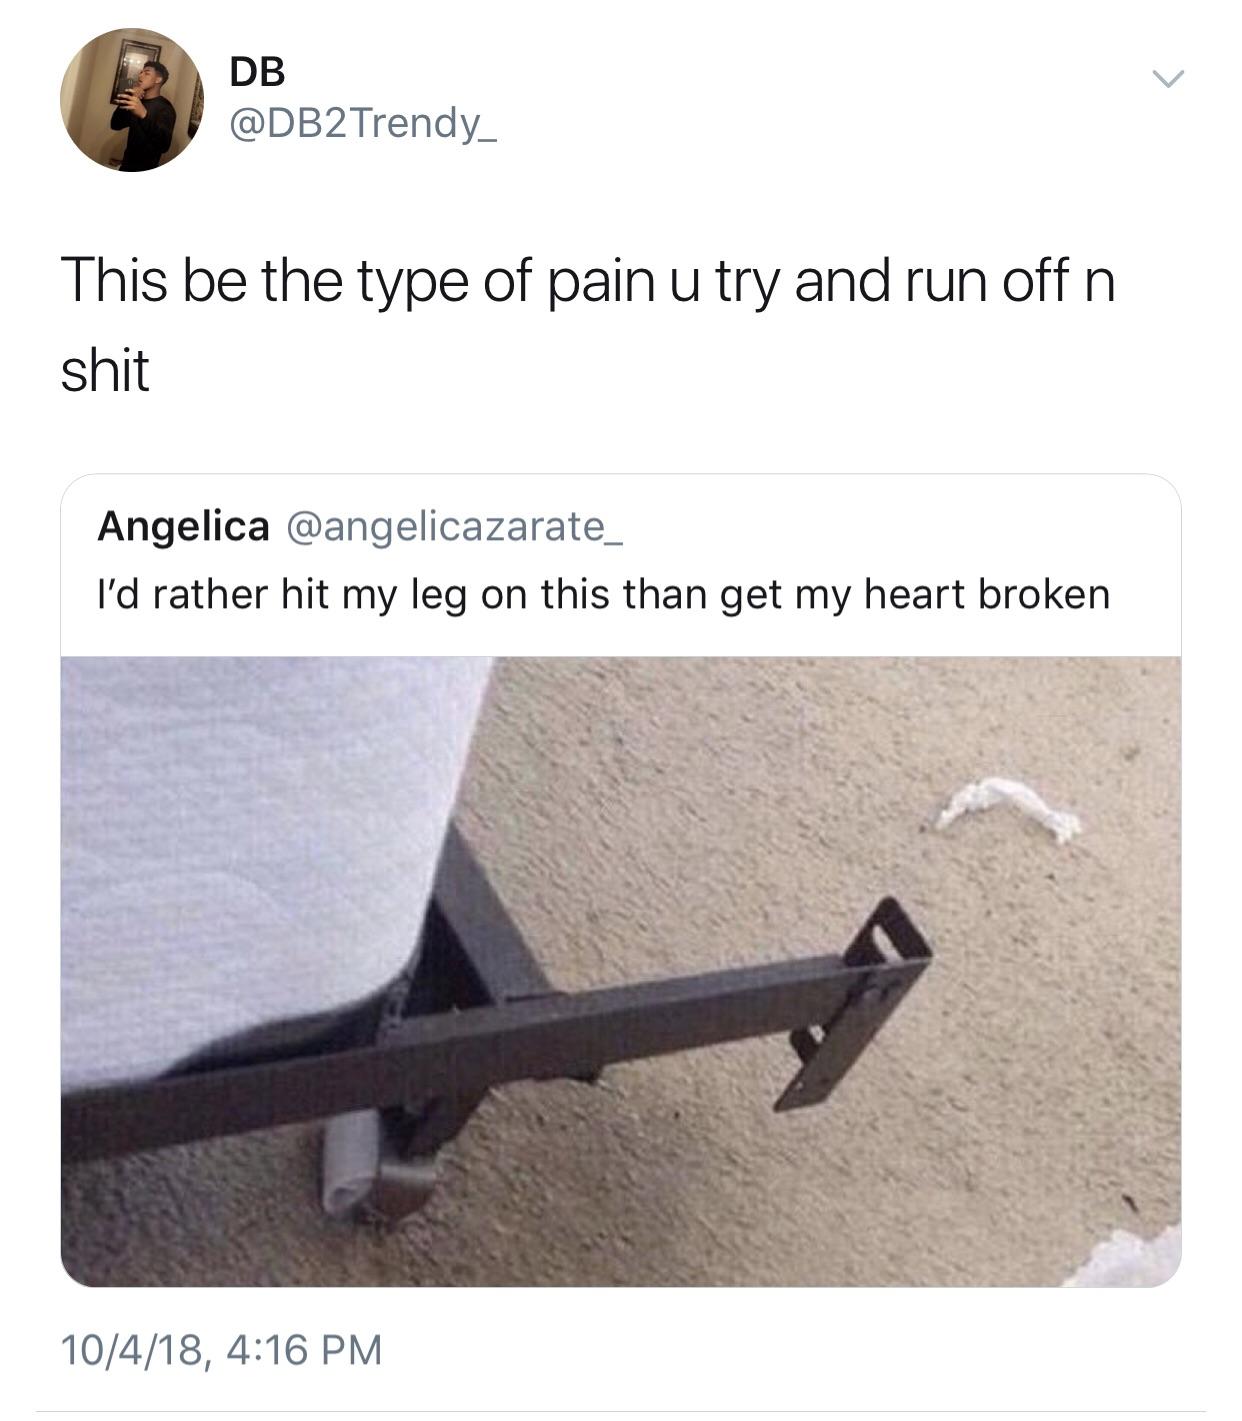 world's most deadly weapon meme - Db Trendy This be the type of pain u try and run off n shit Angelica I'd rather hit my leg on this than get my heart broken 10418,